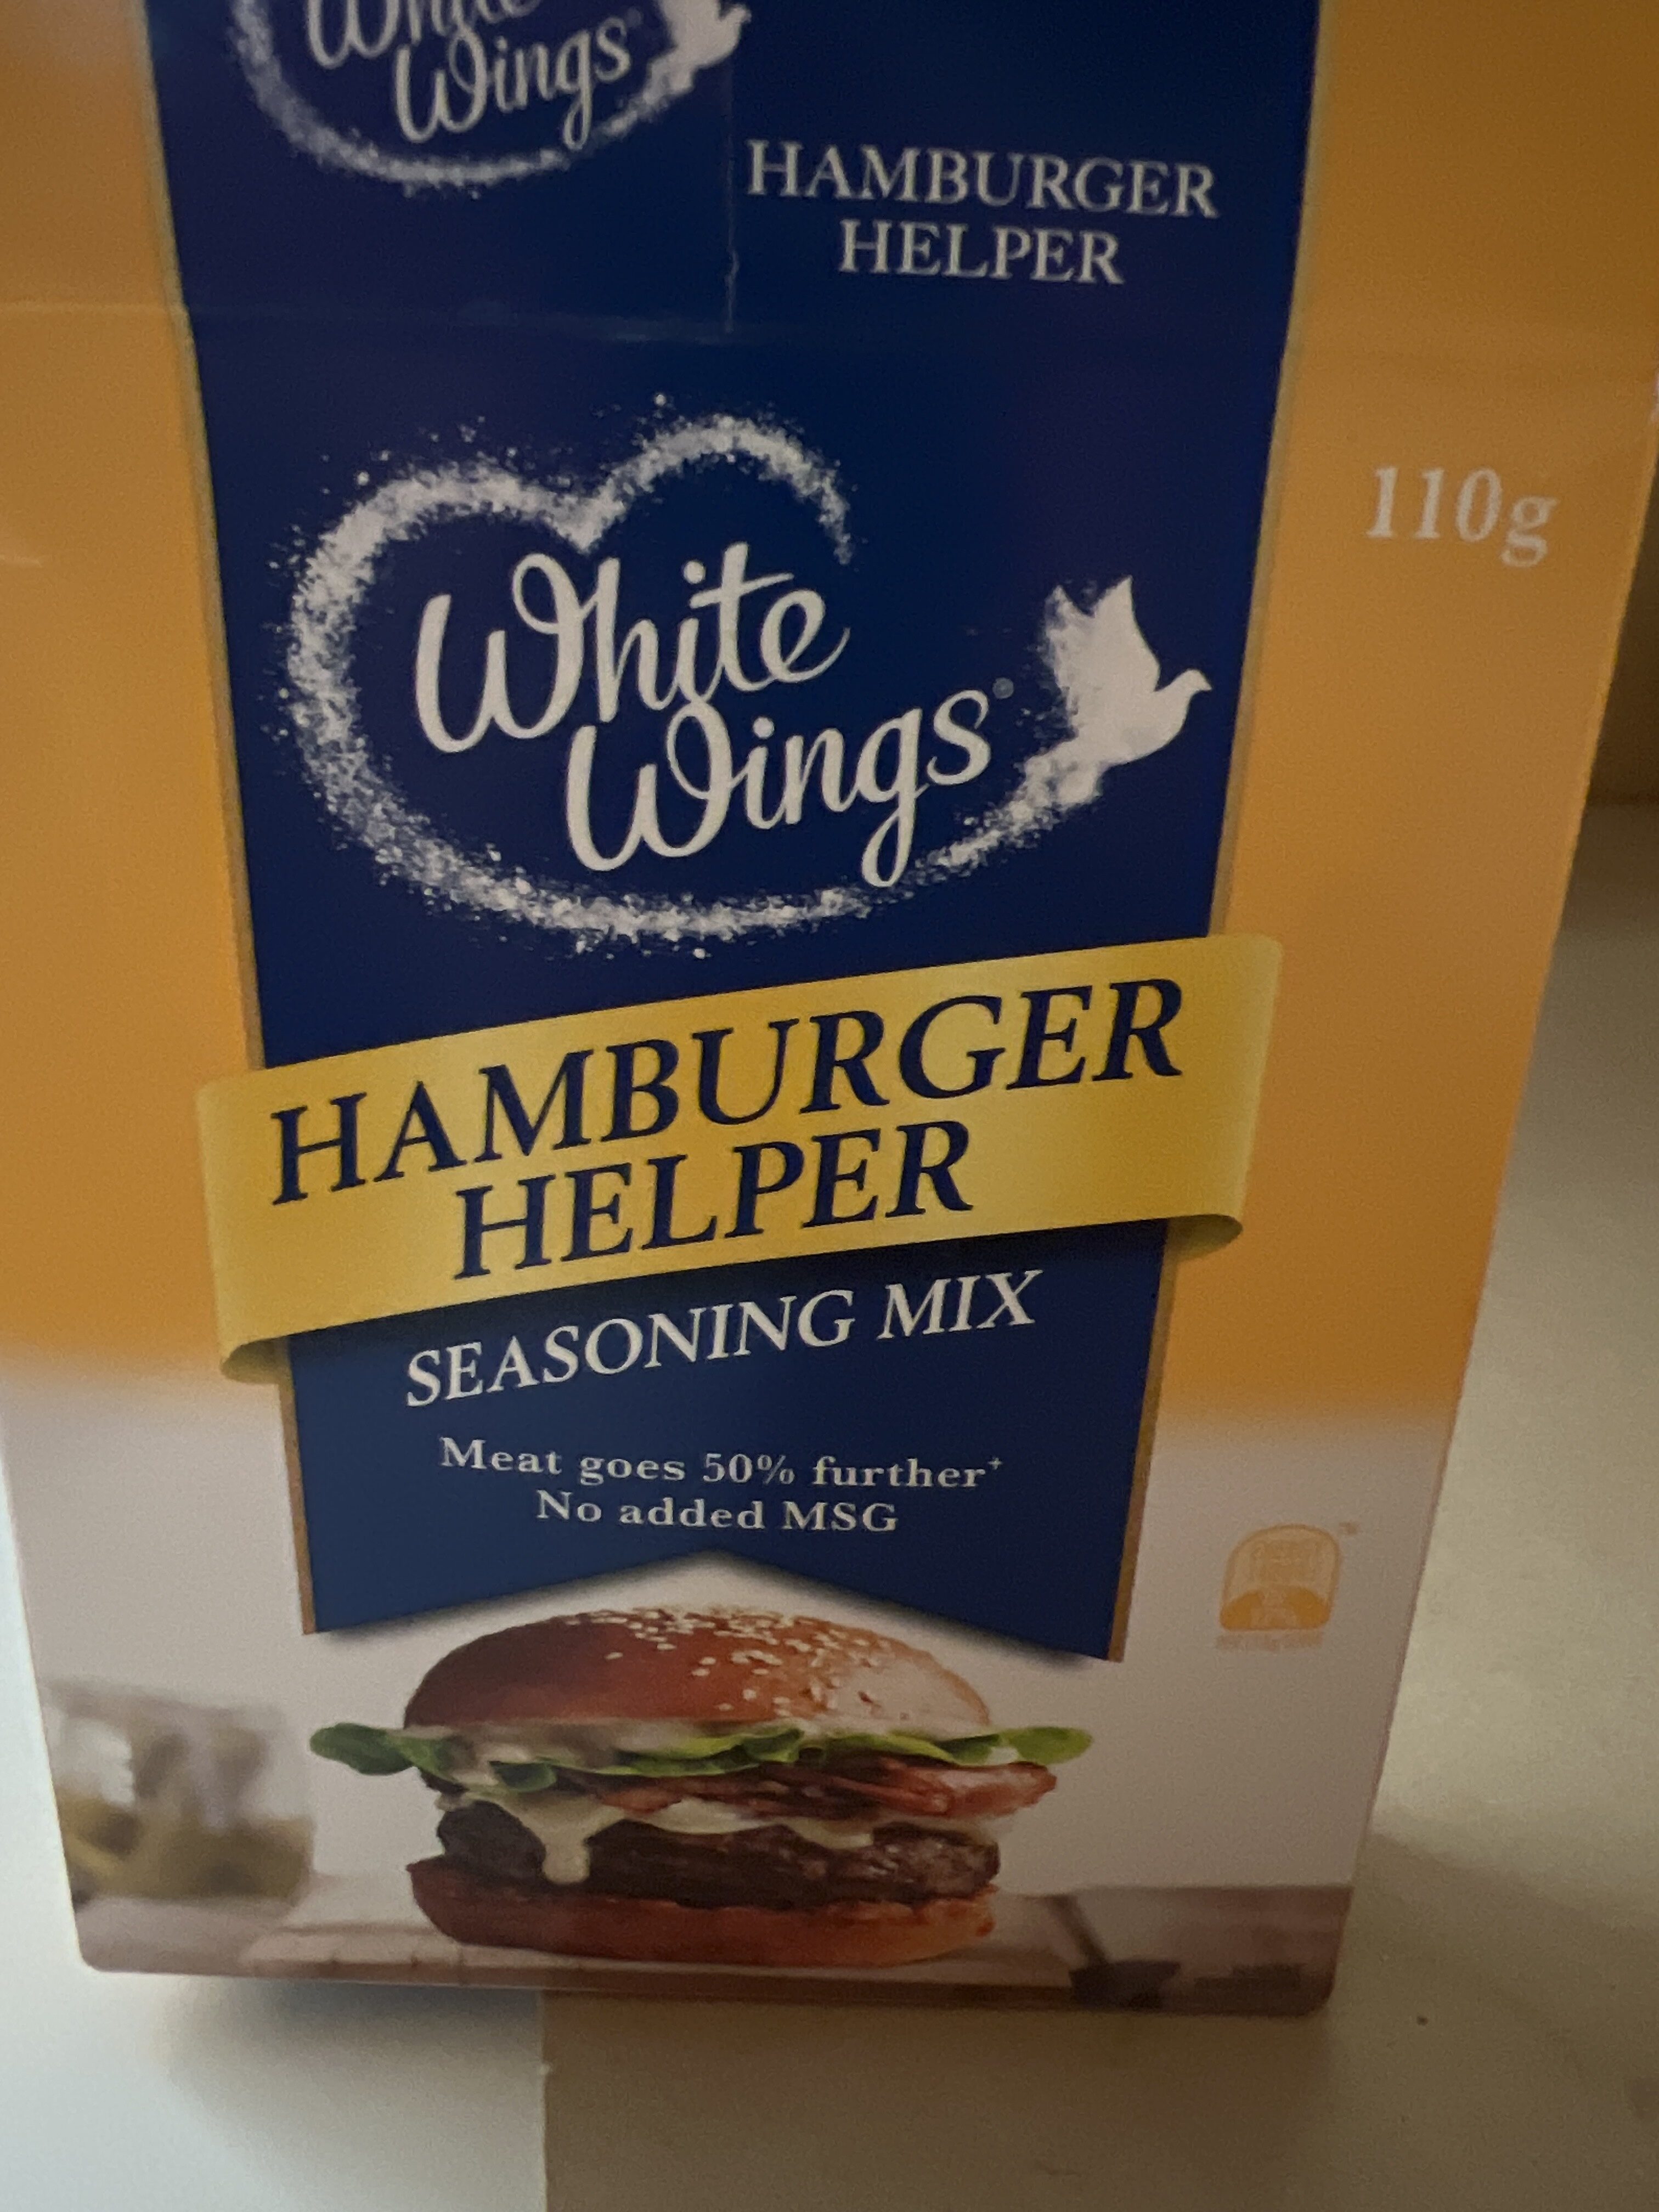 Hamburger helper seasoning mix - Recycling instructions and/or packaging information